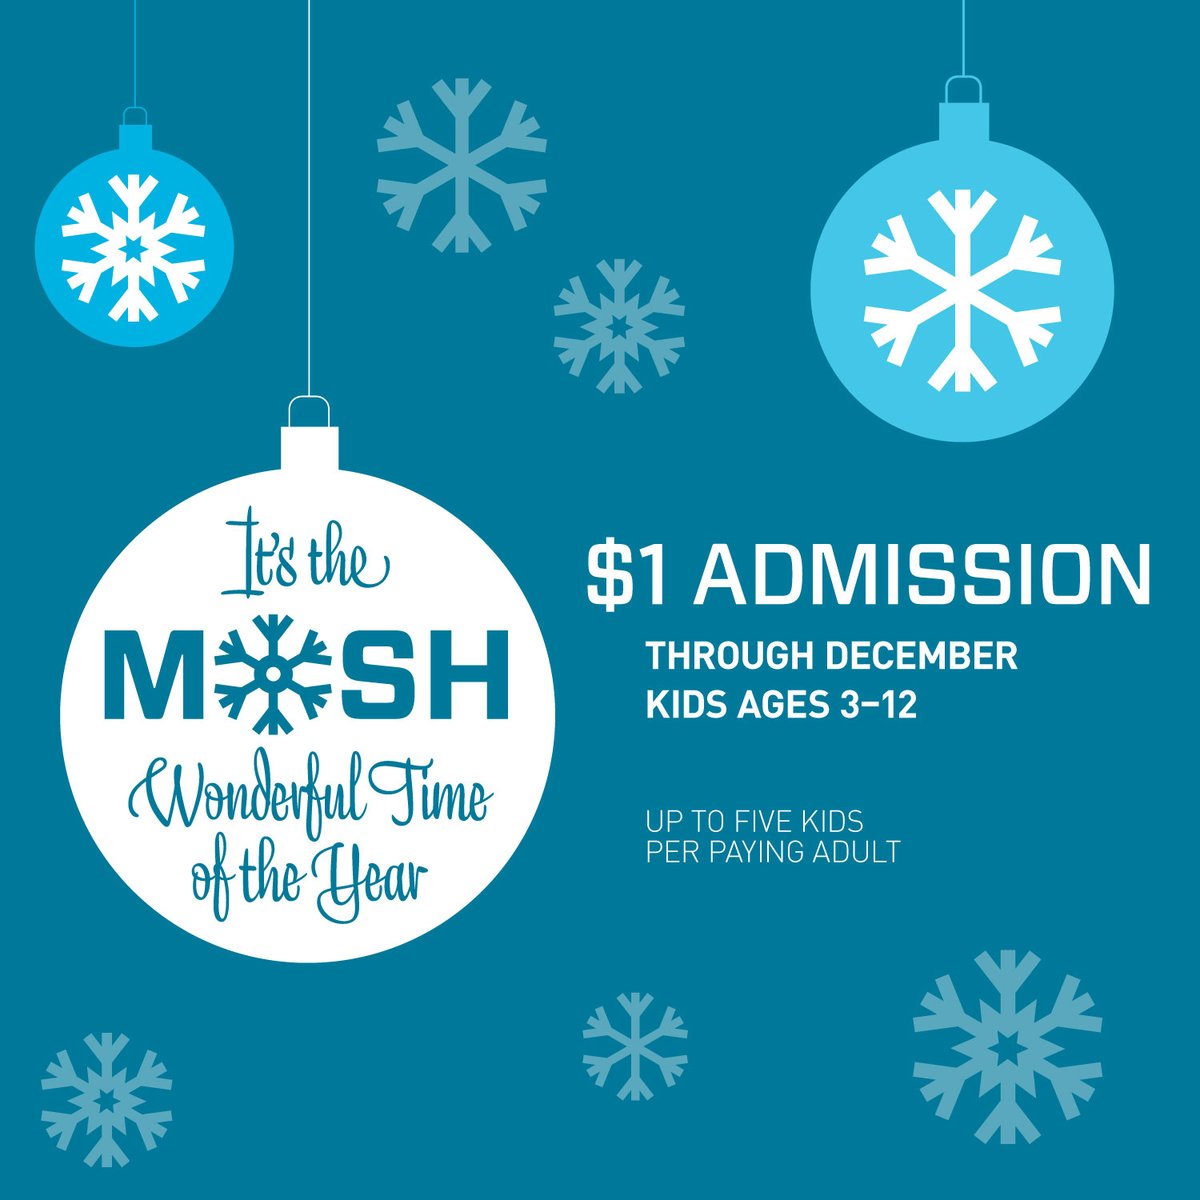 Last weekend for $1 admission for children ages 3 through 12! The discounted tickets must be purchased at the Front Desk. As a friendly reminder, the Museum will be closed on Monday, Jan. 1, and will additionally open on Tuesday, Jan. 2 for Winter Break. themosh.org/visit/visitor-…